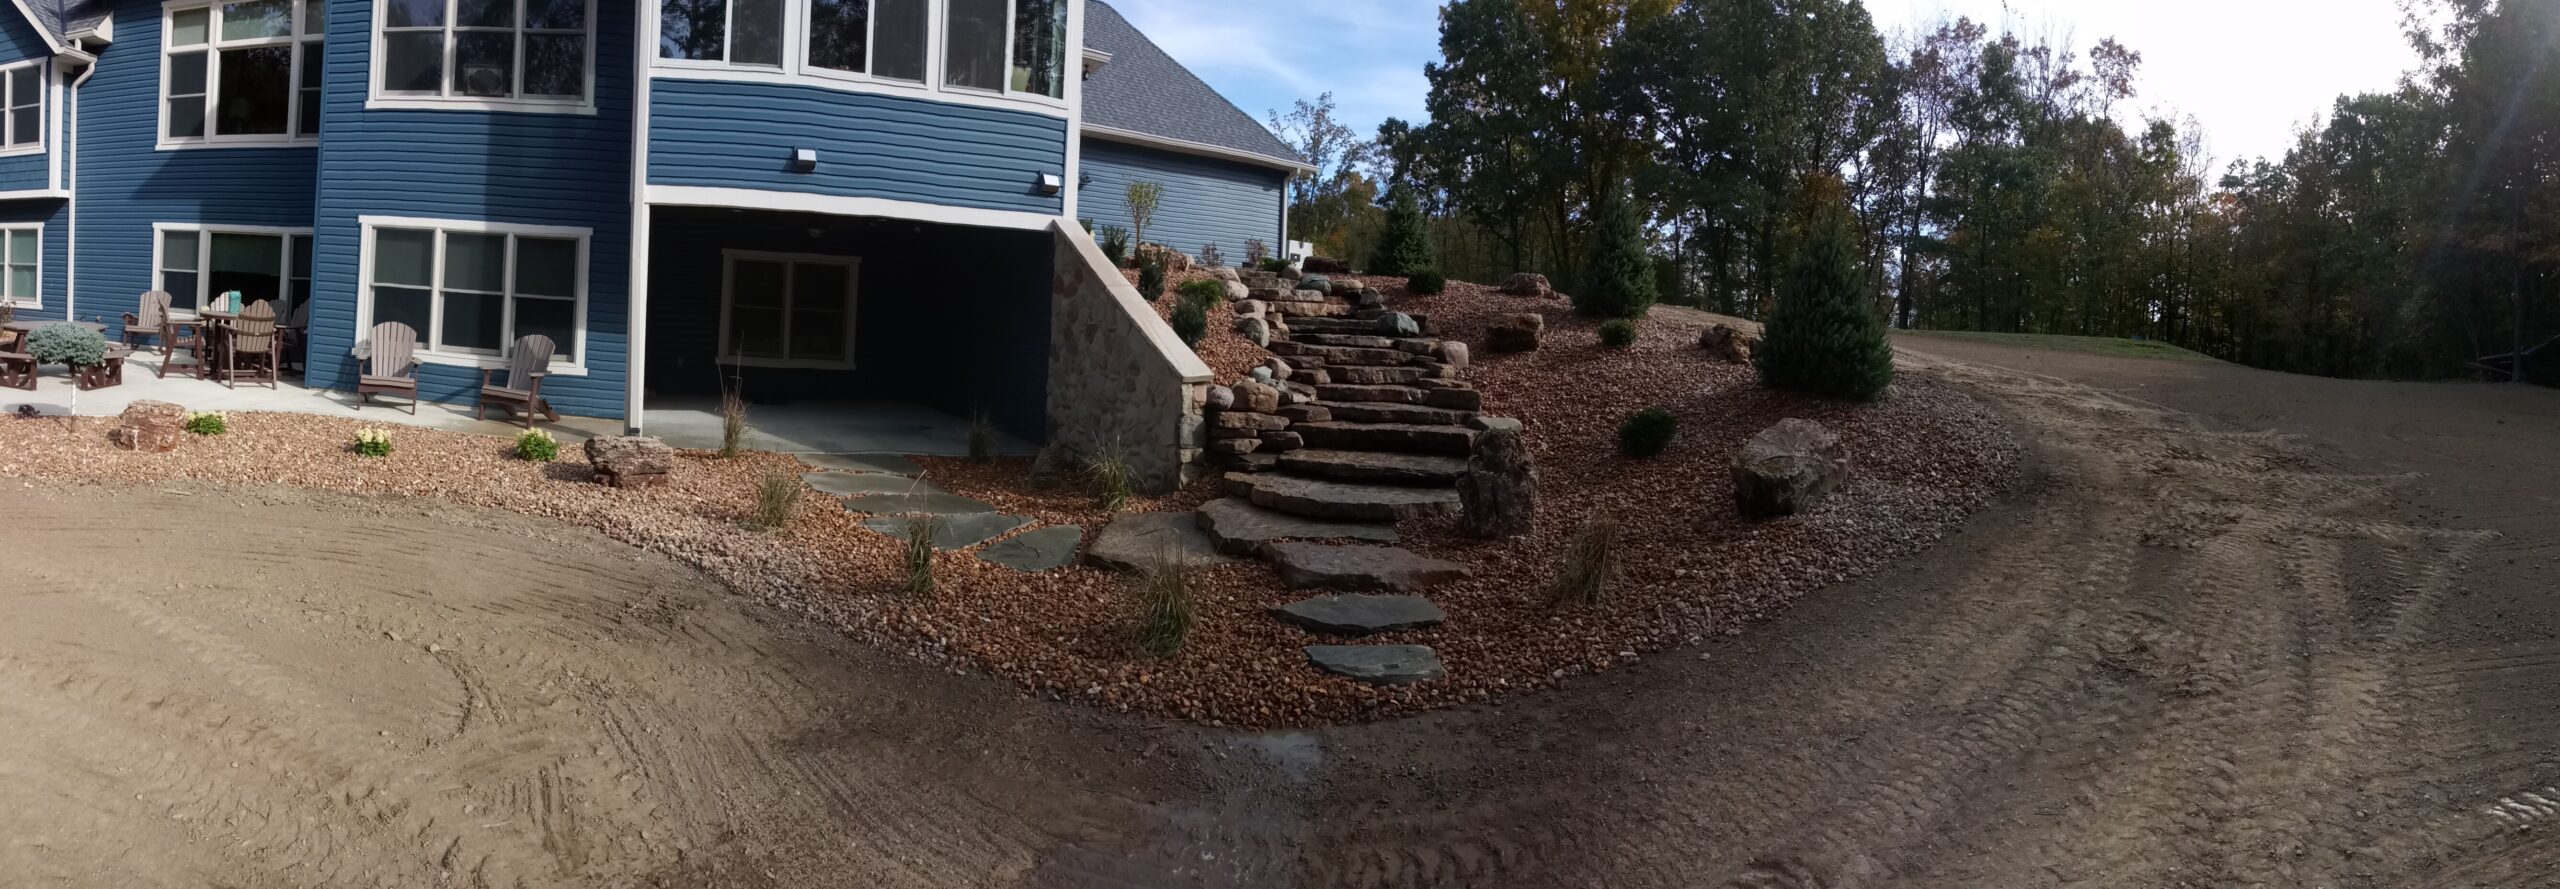 Landscaping and Hardscaping Services, Greater Fort Wayne Area